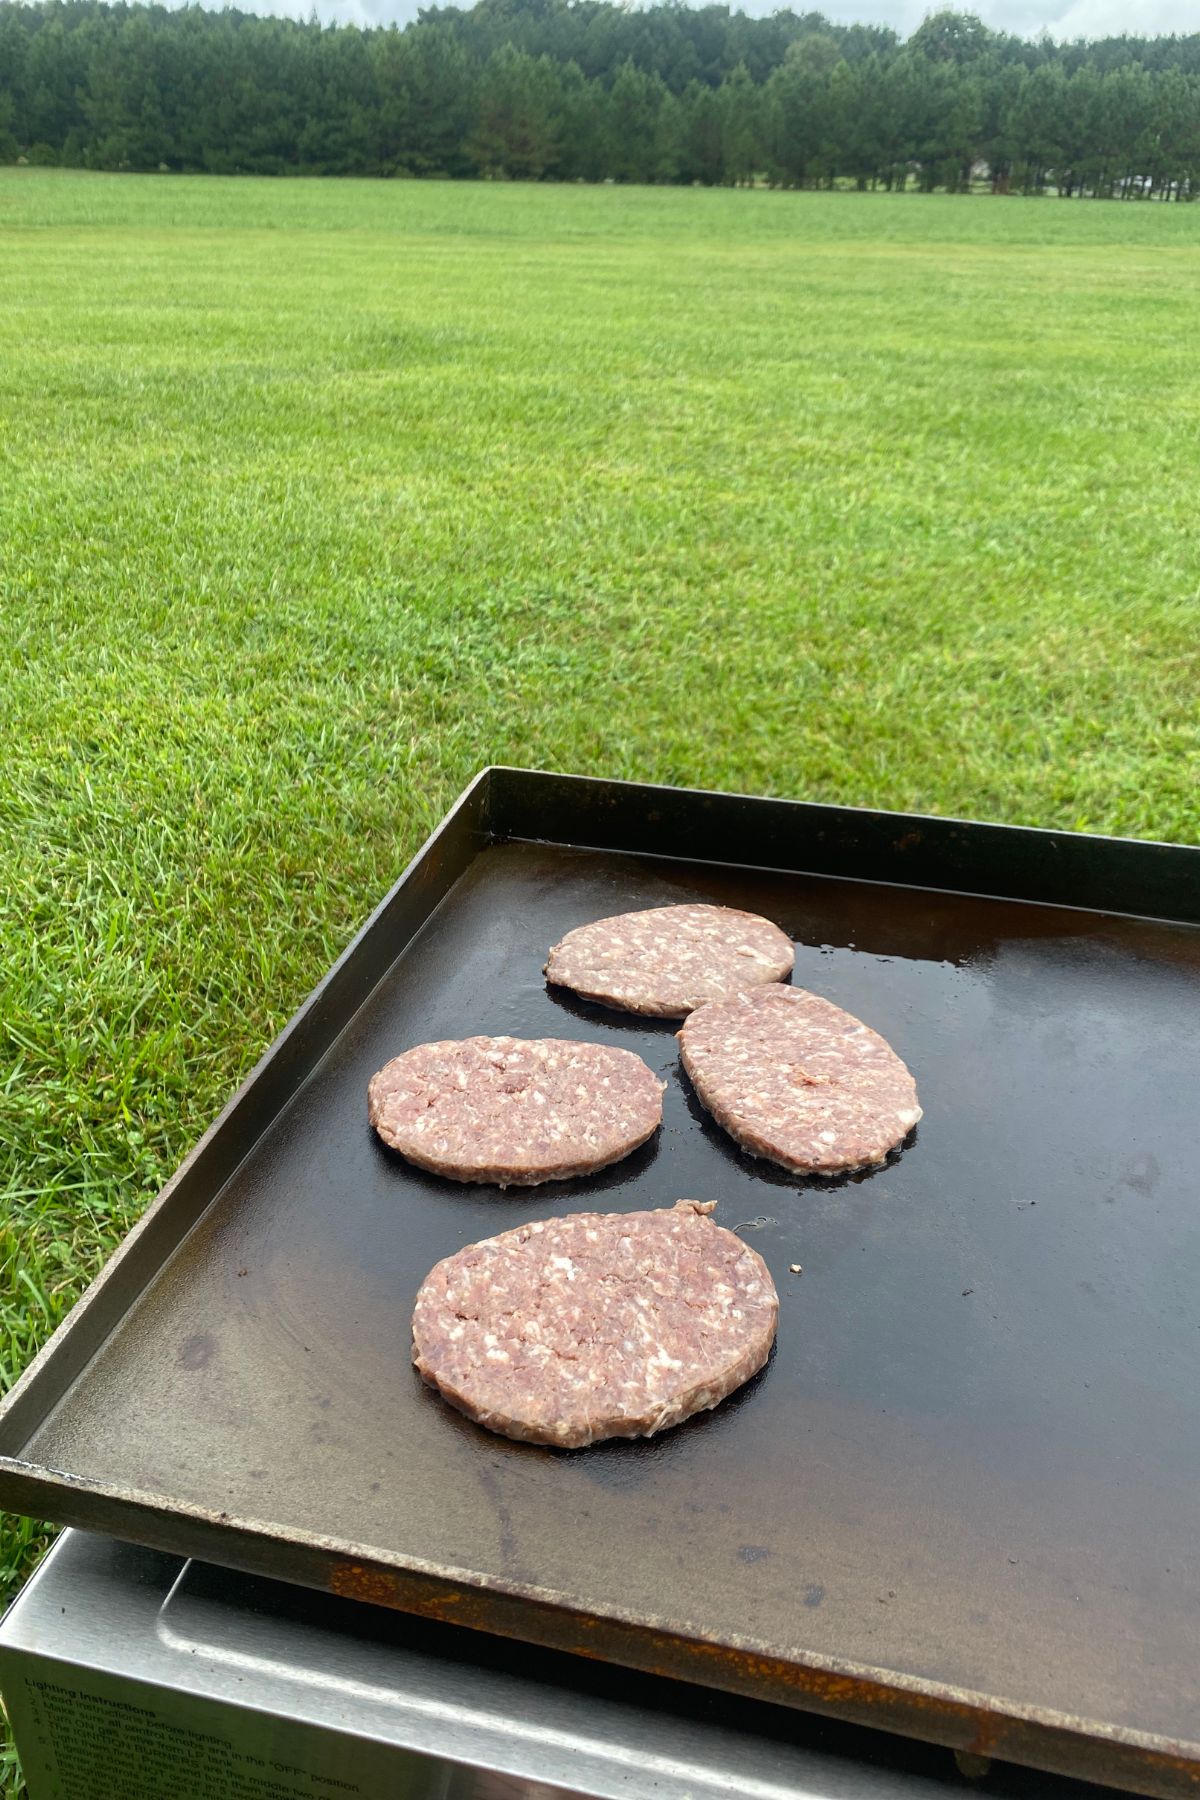 Burgers are being cooked on a grill in a field.